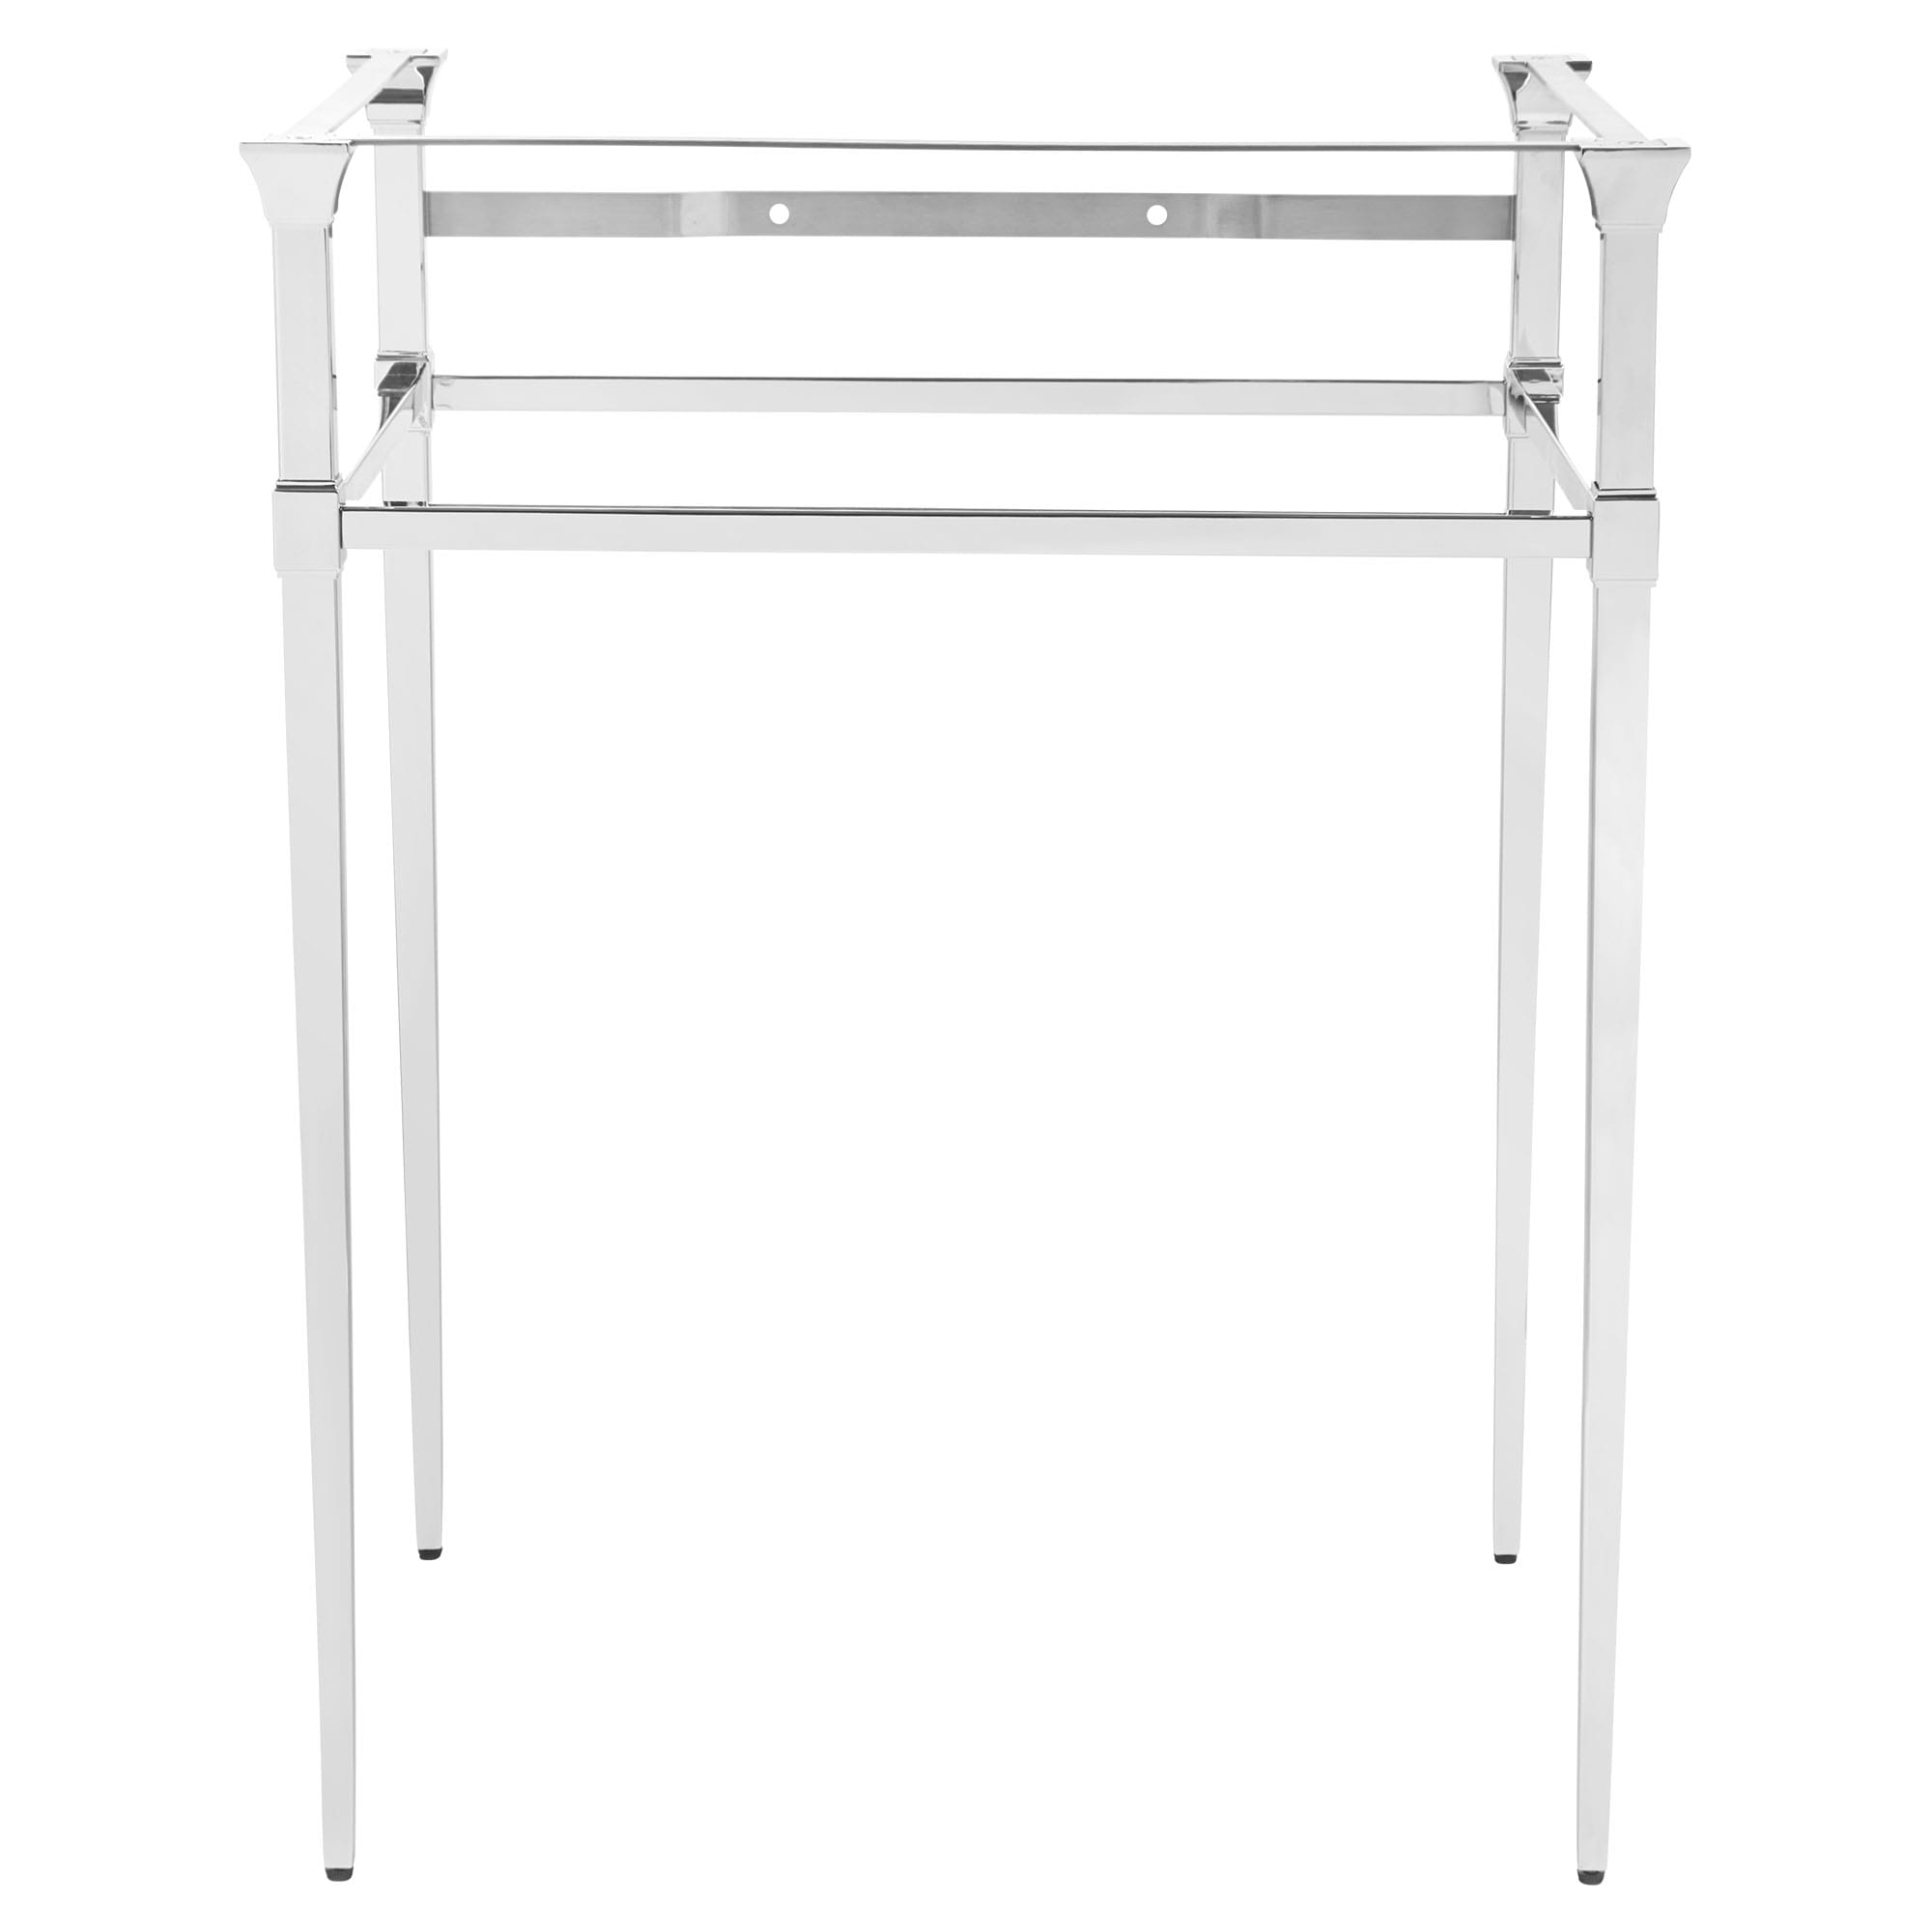 Town Square® S Console Table